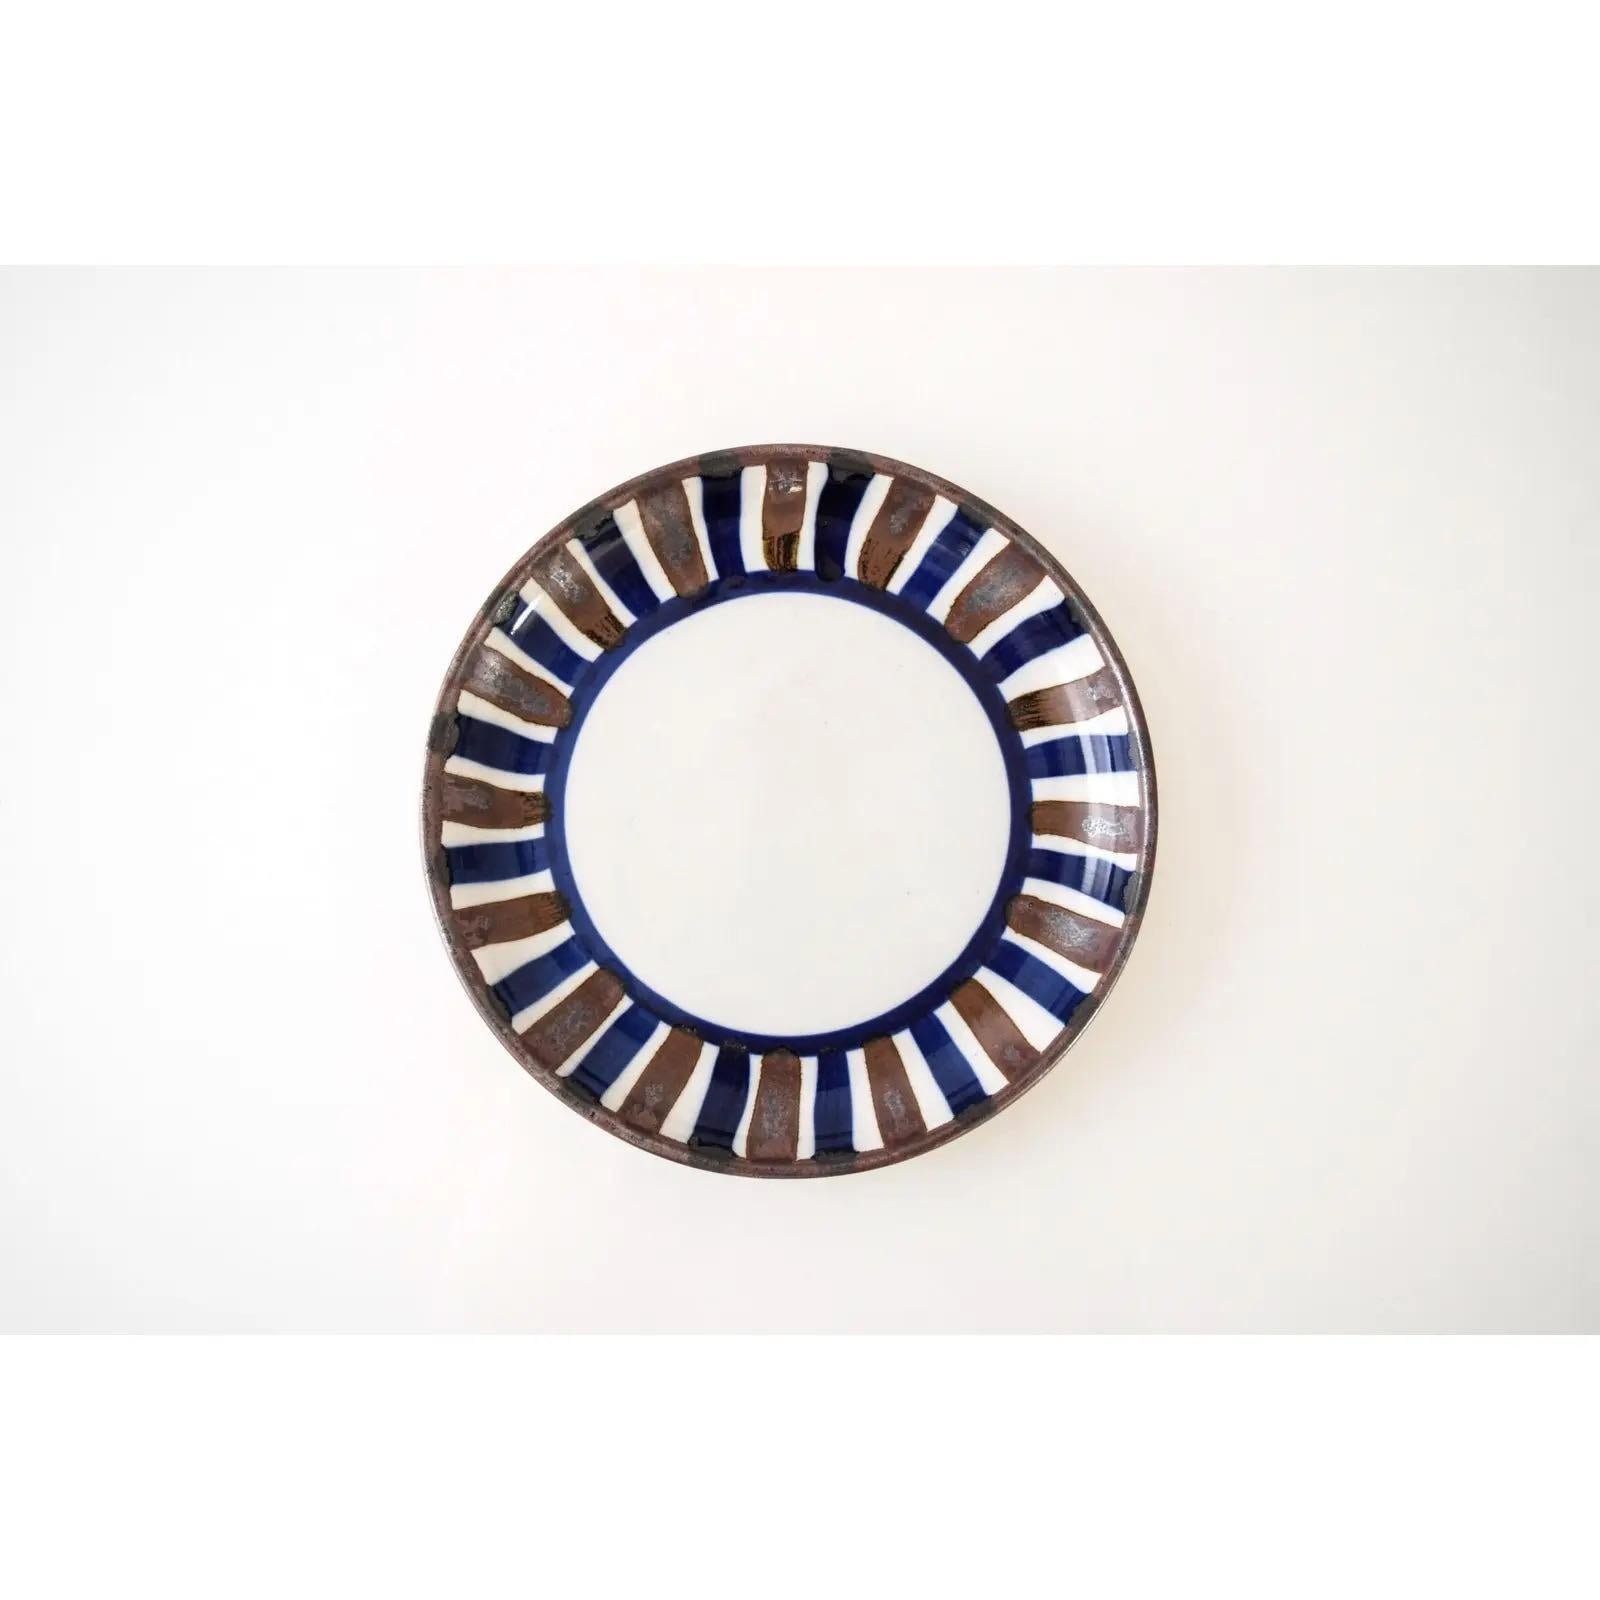 This vintage midcentury Danish modern Dansk small decorative ceramic bowl or dish circa 1960 has a lovely shallow profile. The simple modernist design ffeatures organic hand painted blue & brown stripes.

Dimensions: 
Dia. 7 7/8” (20 cm) x H 7/8”